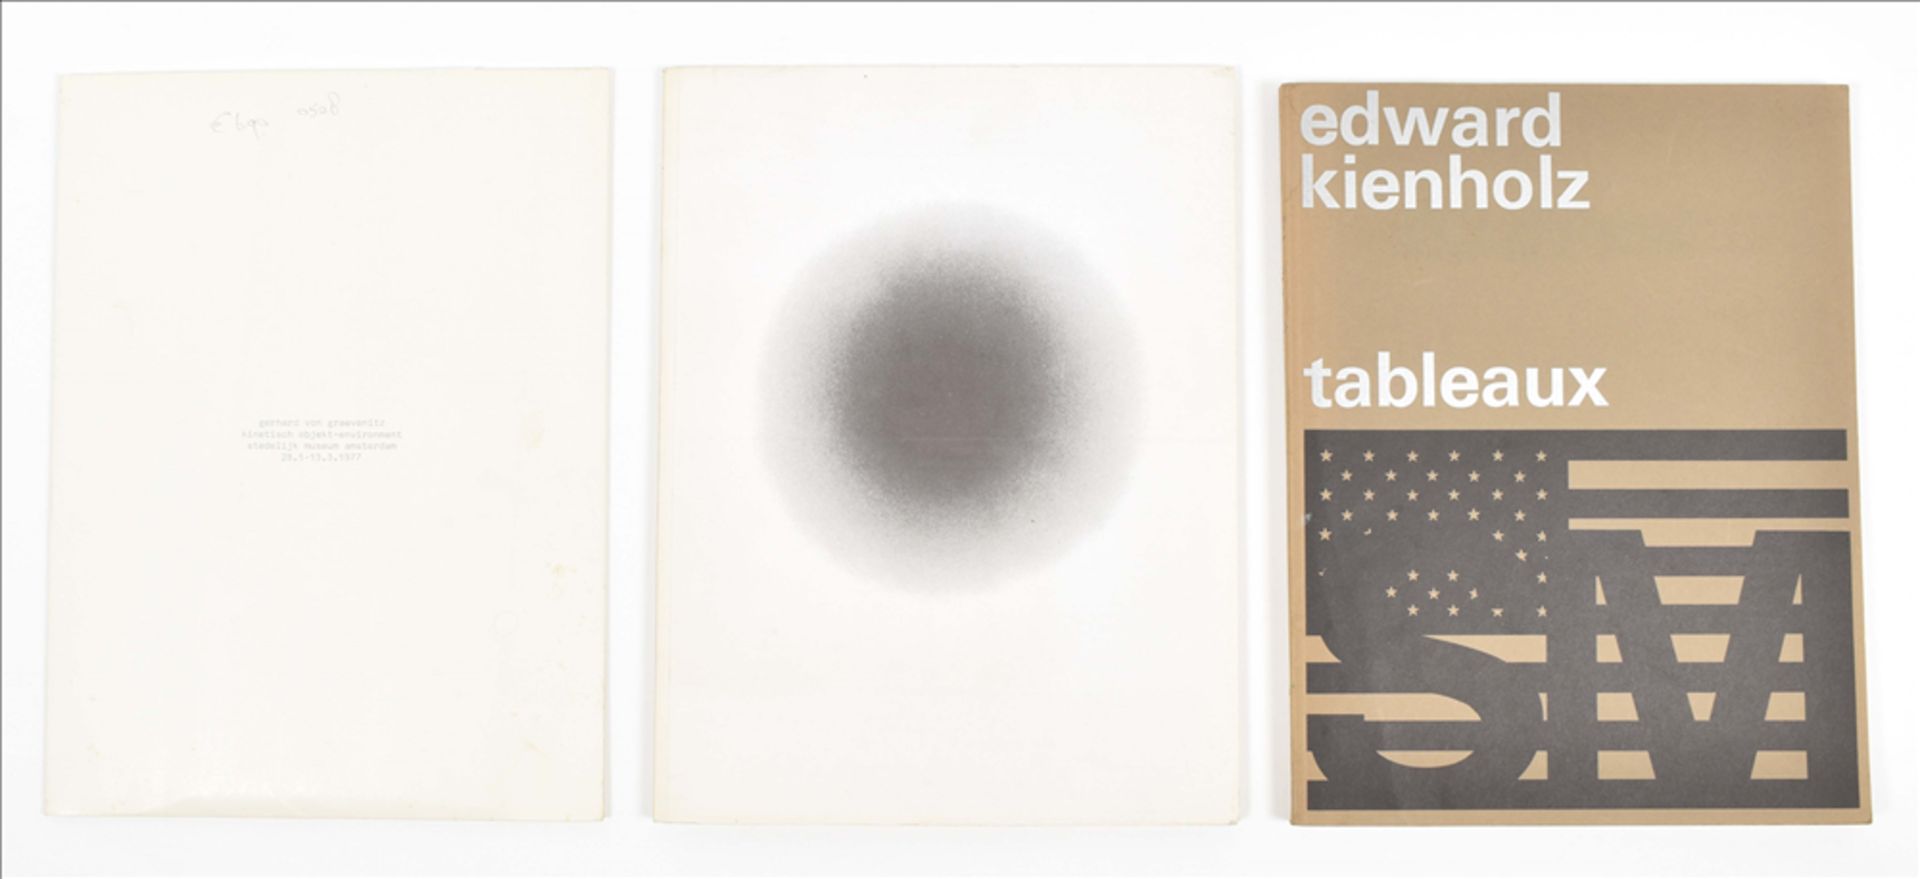 Lot of 42 Stedelijk Museum Catalogues - Image 6 of 10